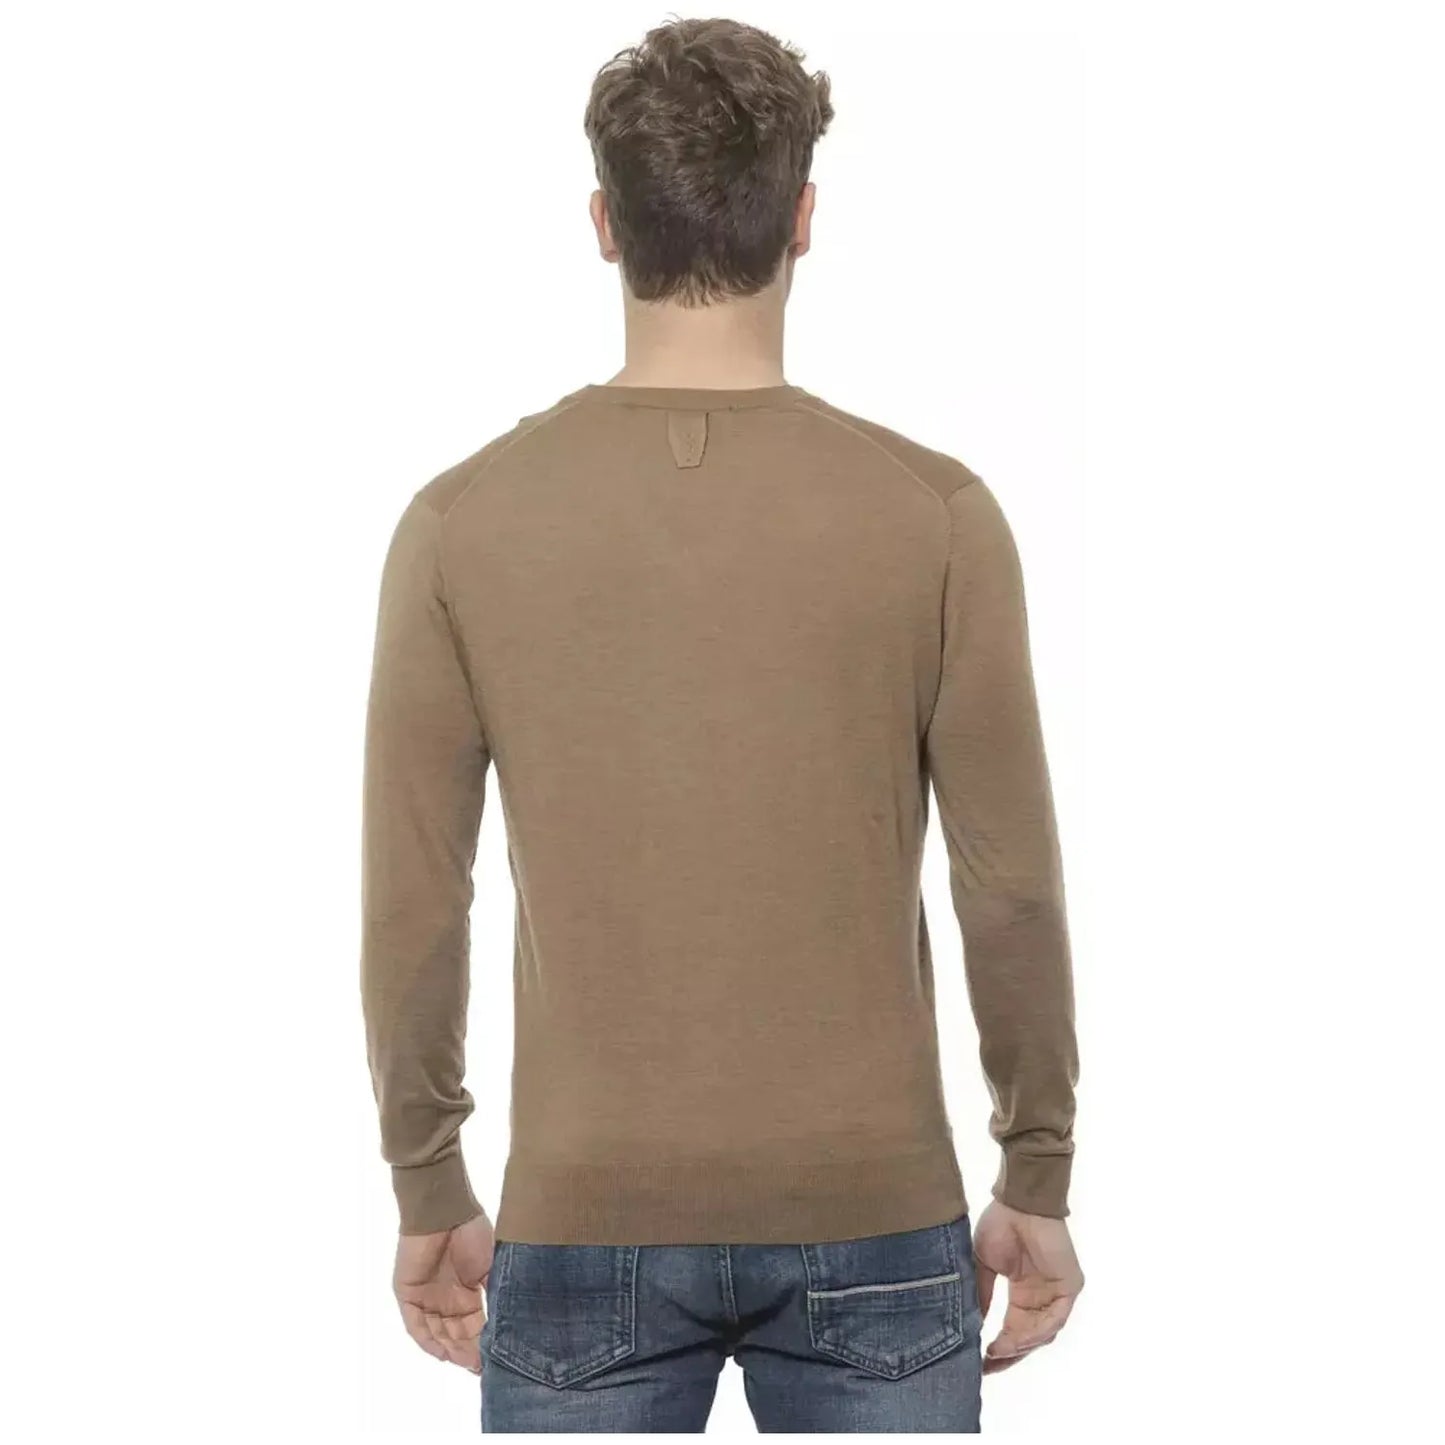 Billionaire Italian Couture Elegant Beige V-Neck Cashmere Sweater for Men tabacco-sweater stock_product_image_19963_1257149173-16-ac8a3865-c47.webp